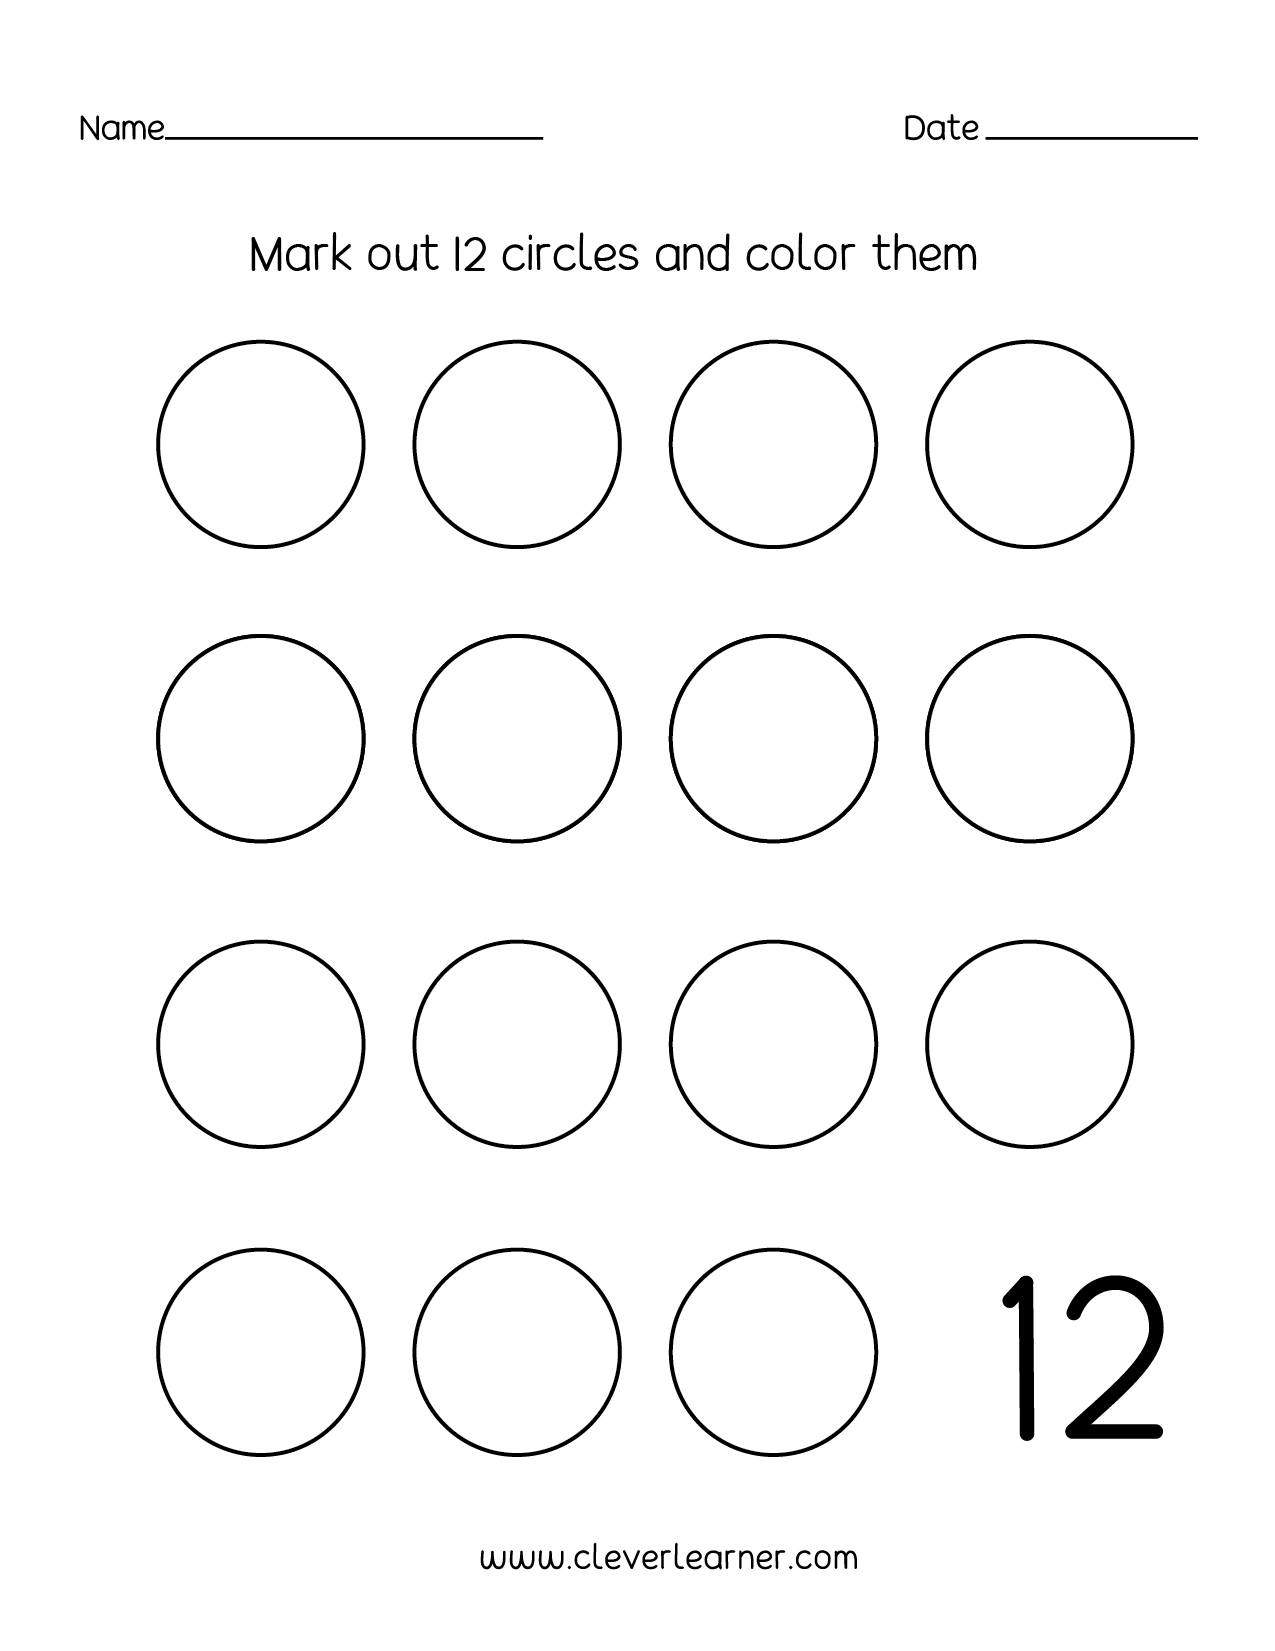 Number 12 Objects Worksheets